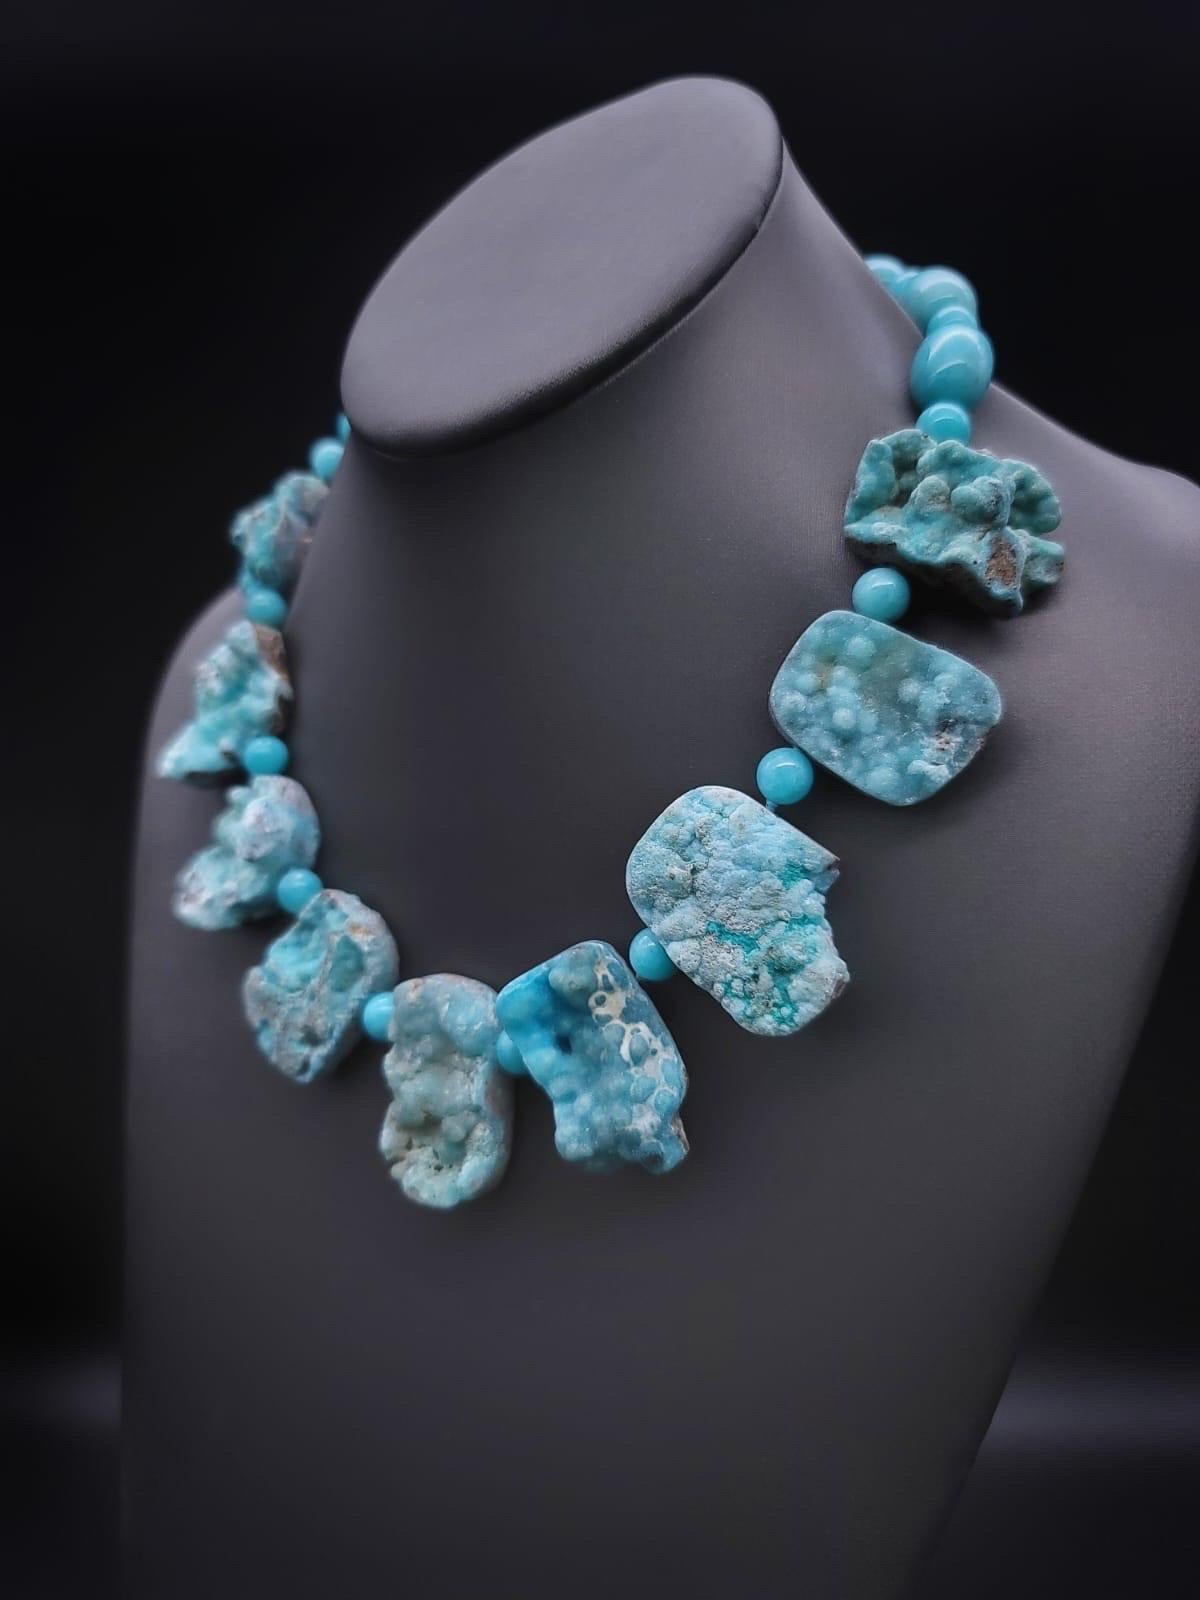 Mixed Cut A.Jeschel Exotic Hemimorphite plates necklace. For Sale